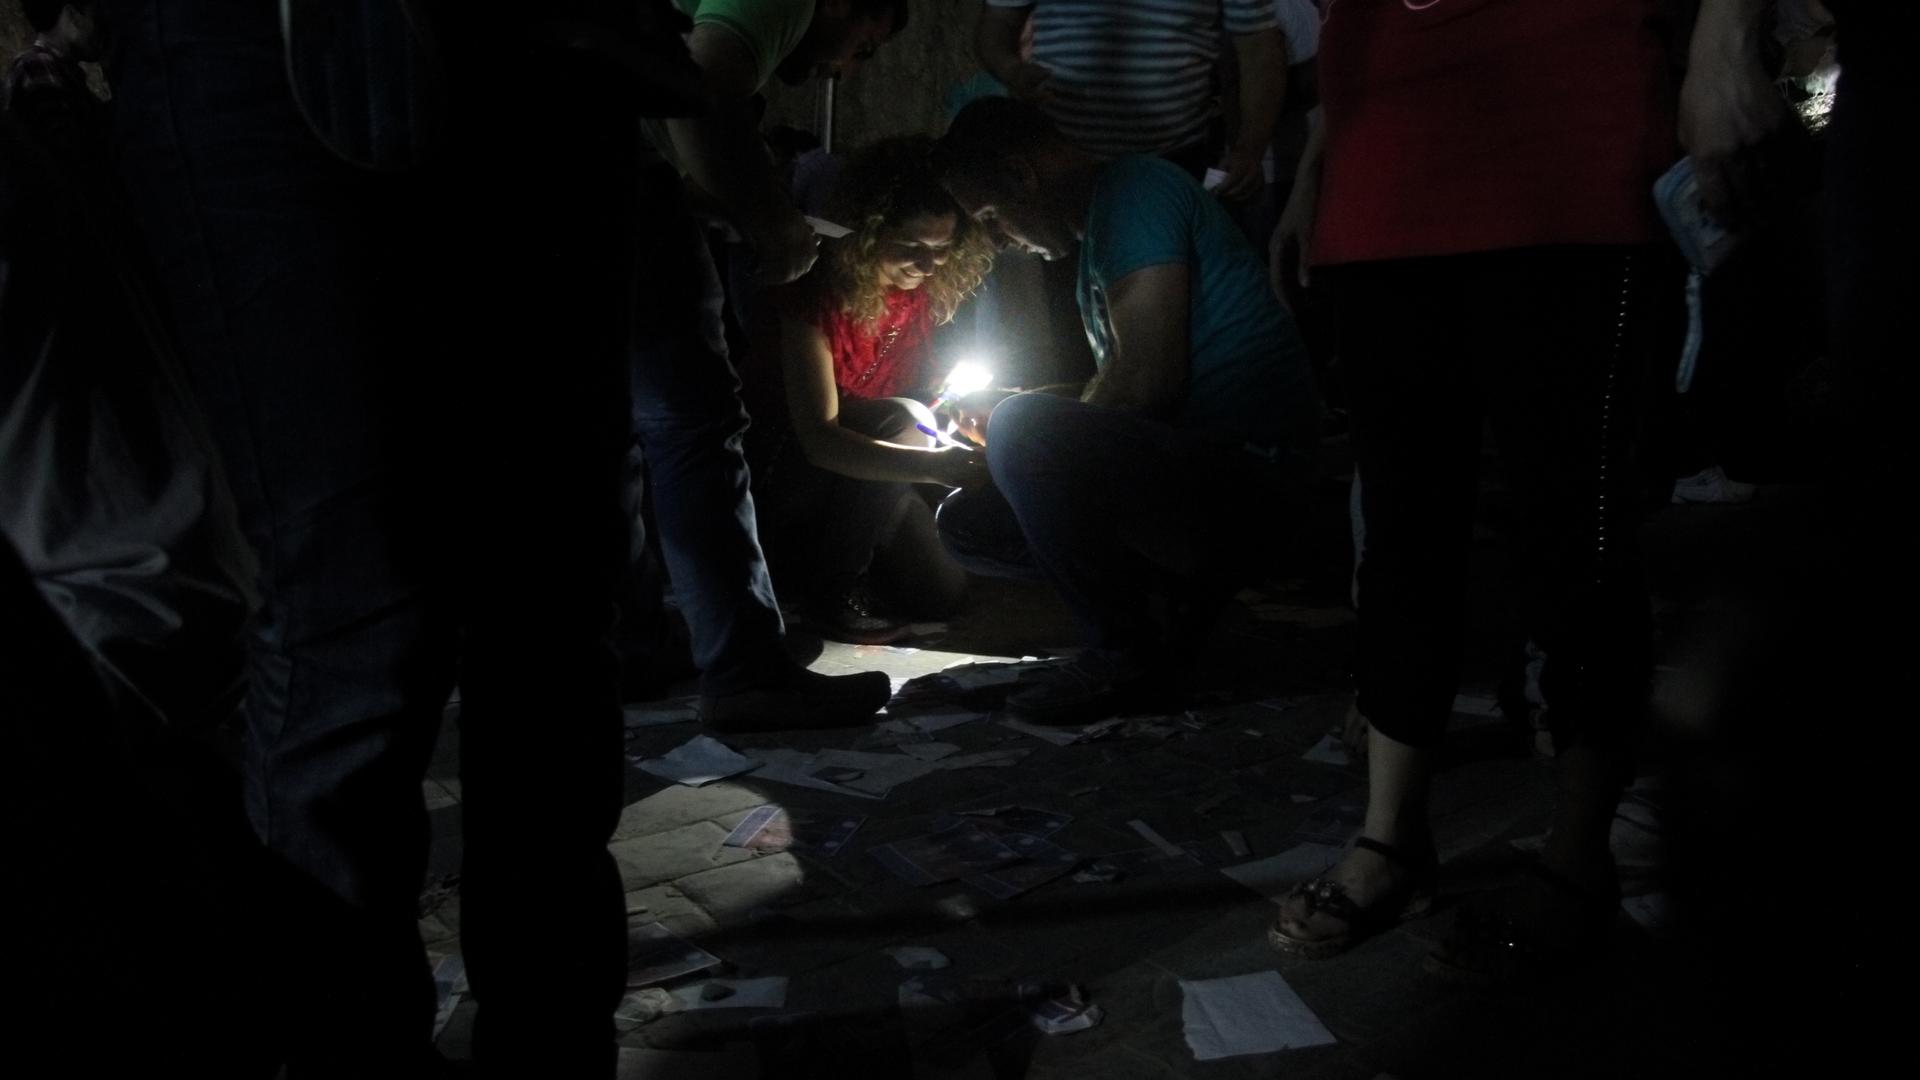 As the sun went down, voters at the Syrian Embassy in Beirut filled out ballots by the light of cellphones and flashlights. The Floors of the polling station were littered with scraps of discarded ballots. 